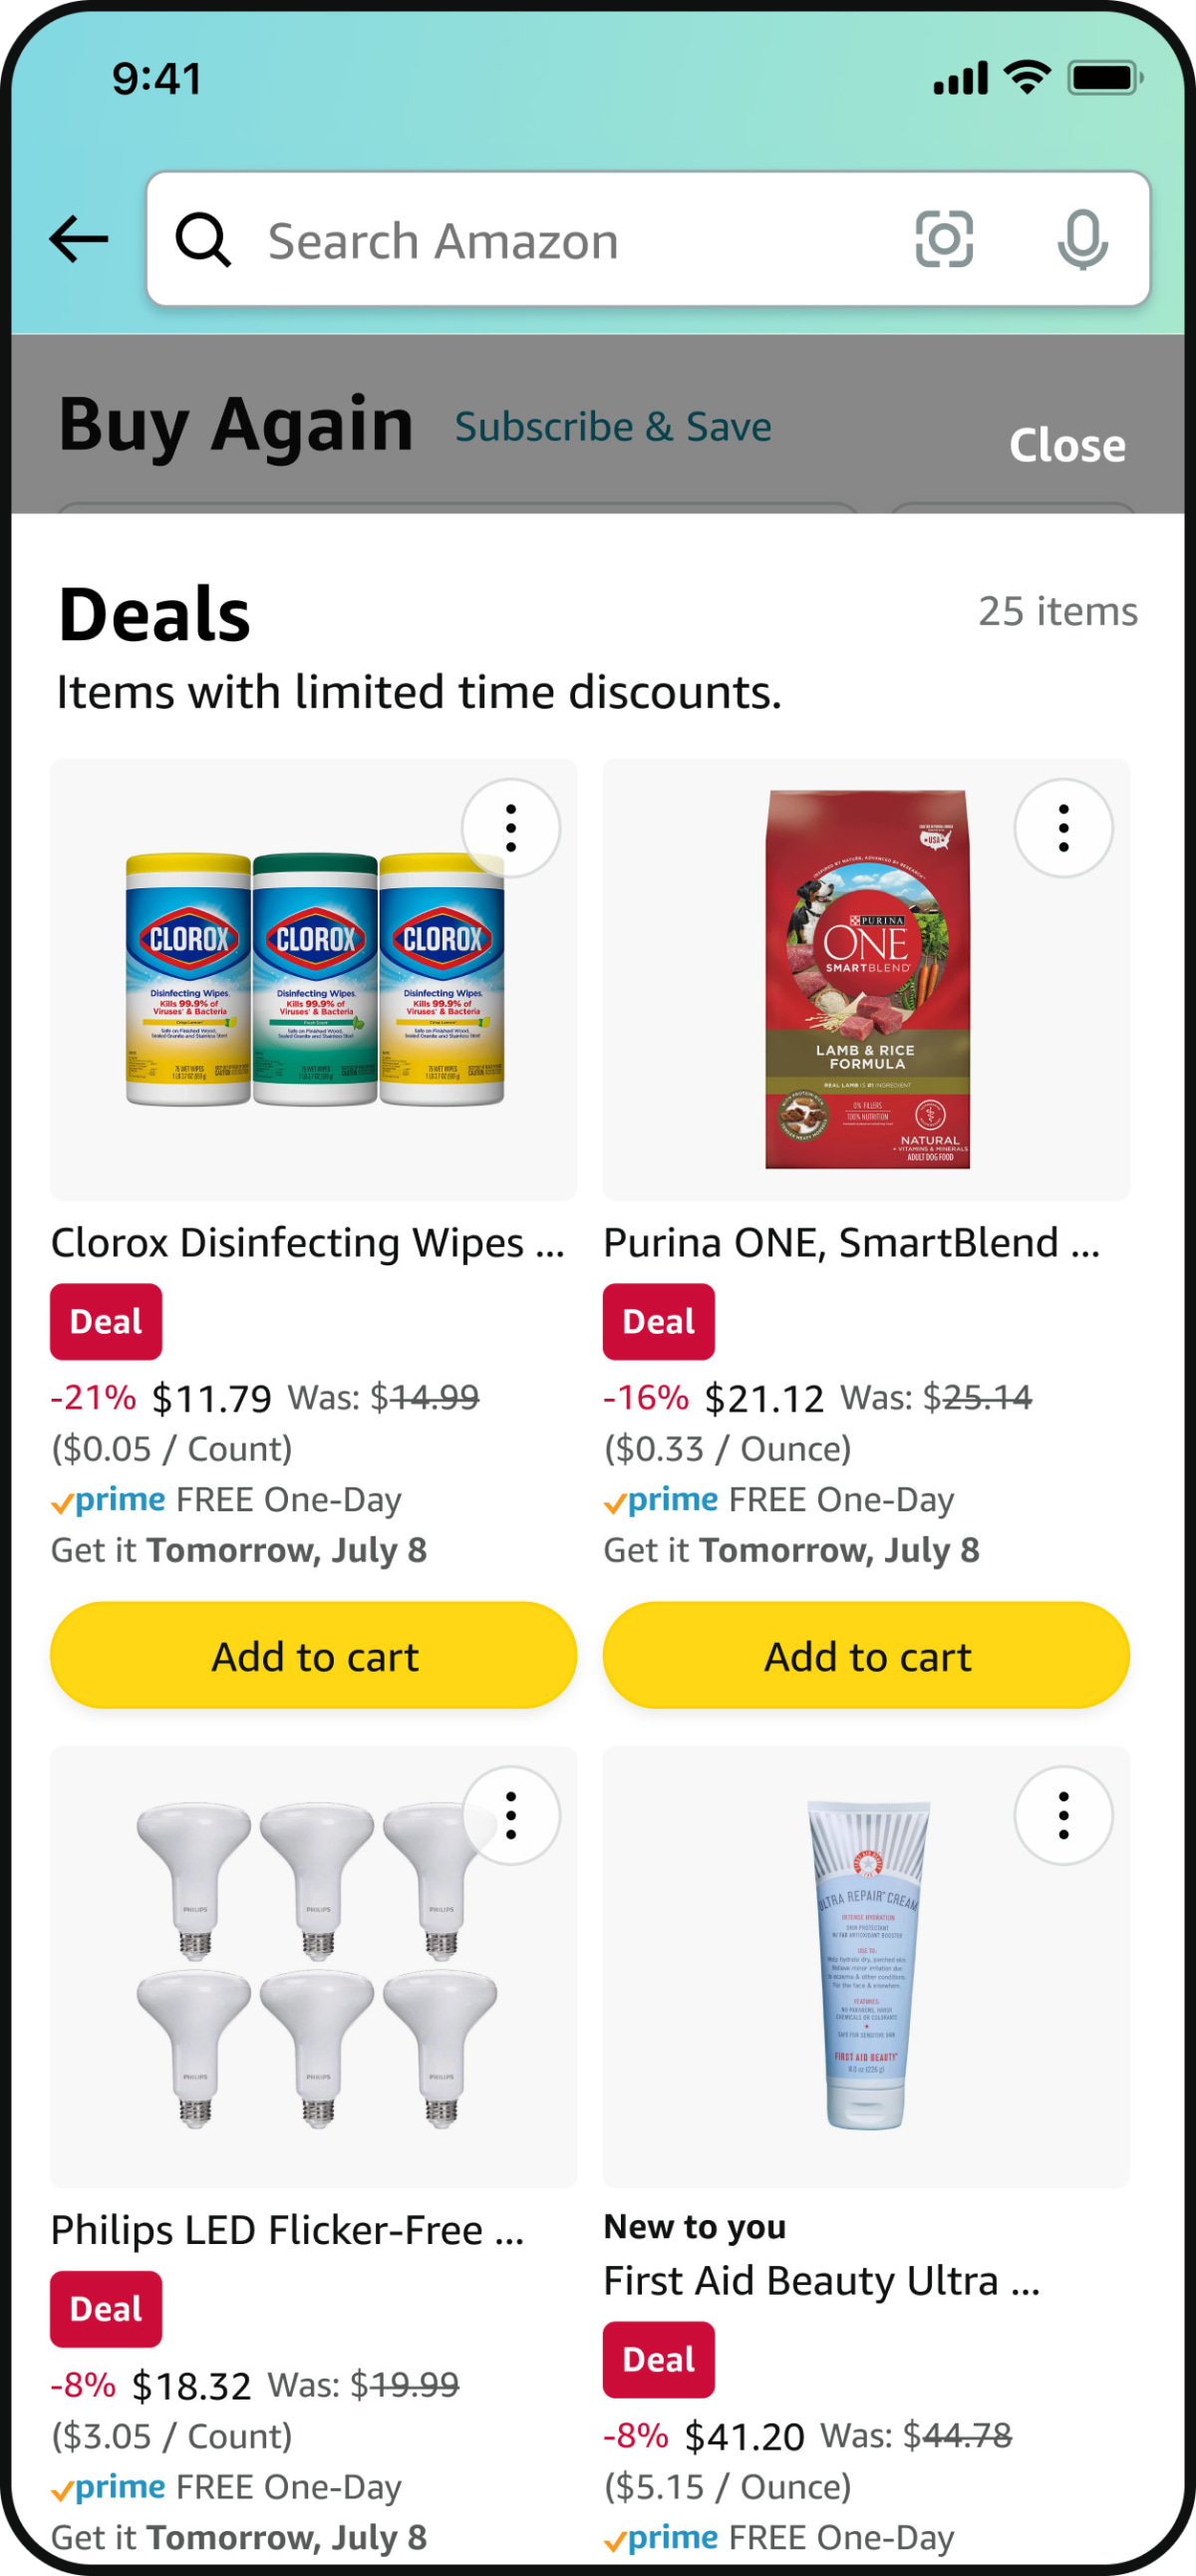 Prime Day will offer over 40 personalized deal features this year